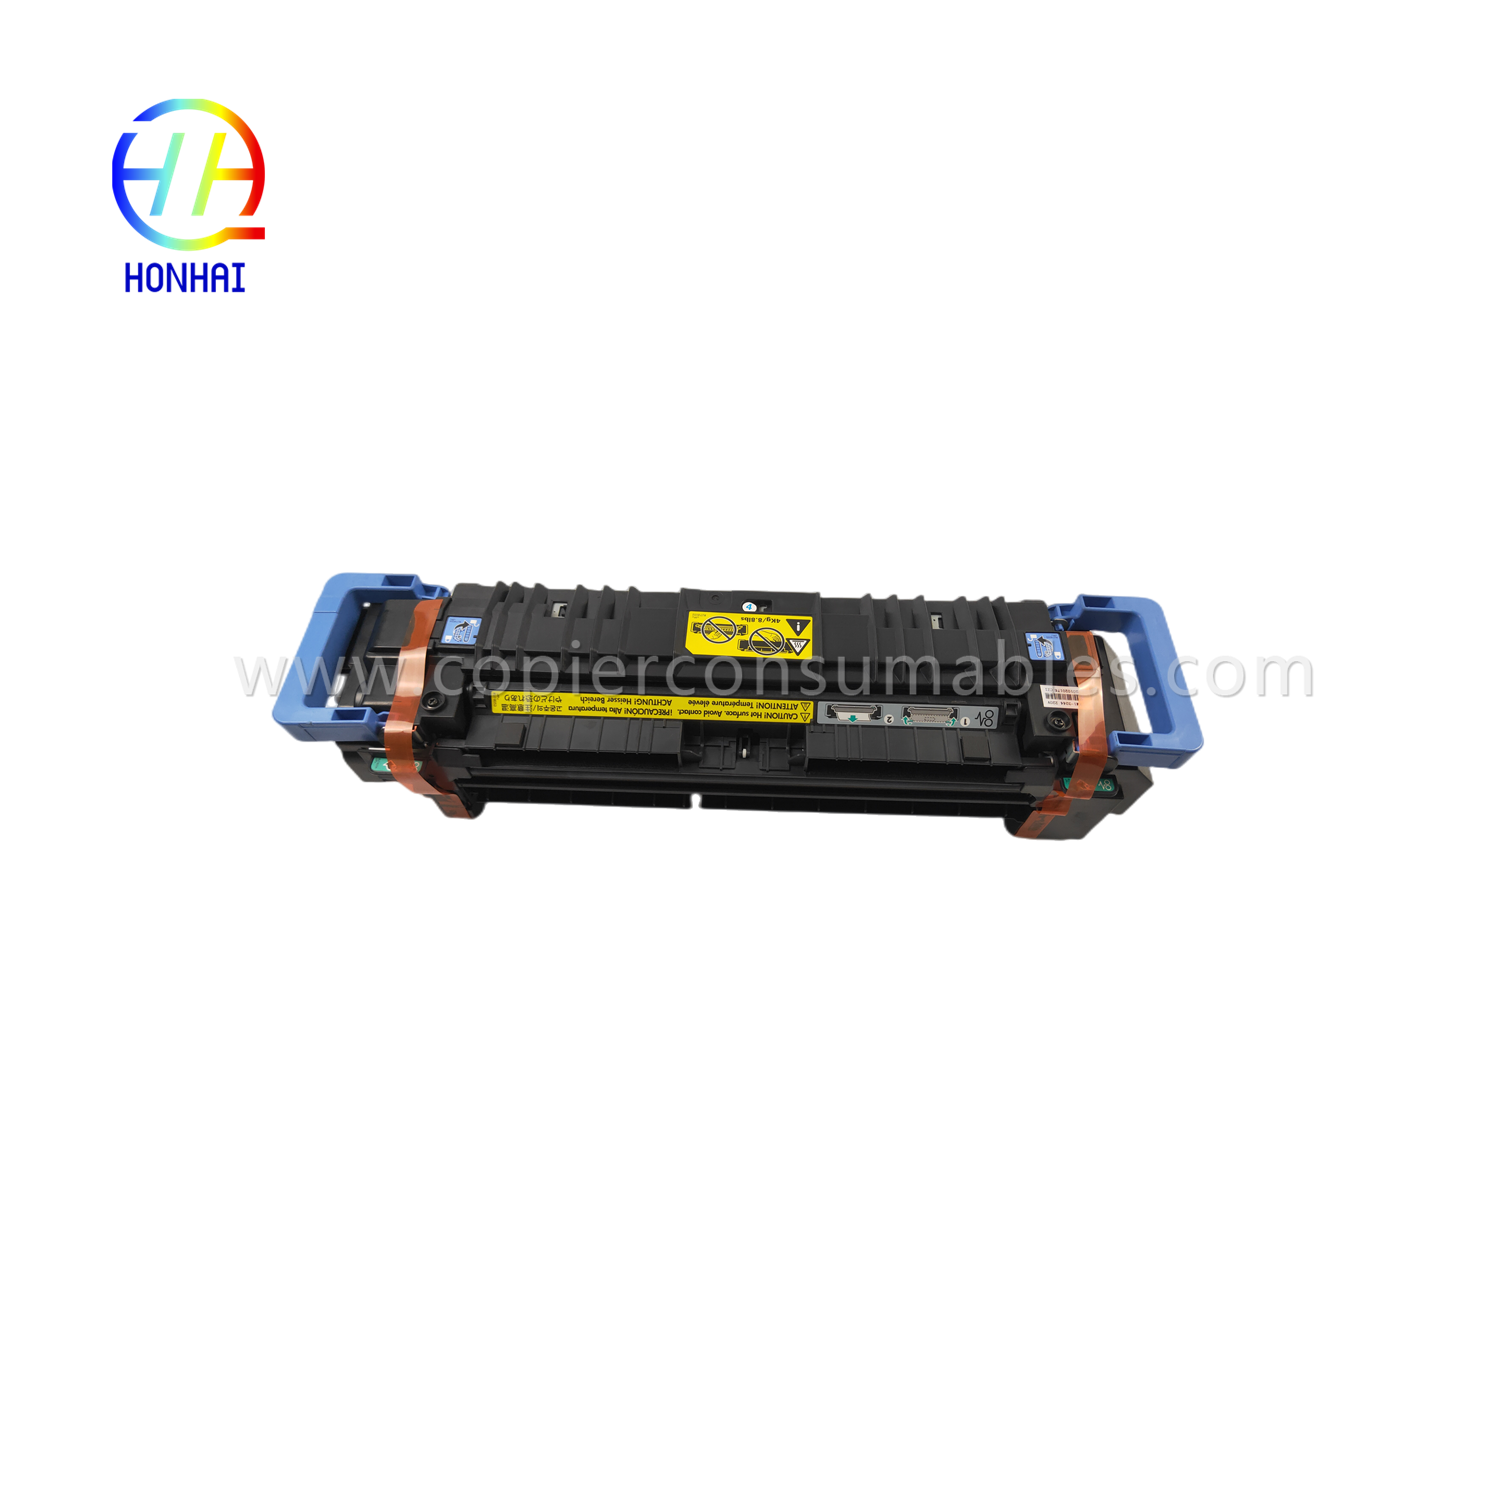 https://www.copierconsumables.com/fuser-assembly-unit-for-hp-m855-m880-m855dn-m855xh-m880z-m880z-c1n54-67901-c1n58-67901-fusing-heating-assy-fixing/